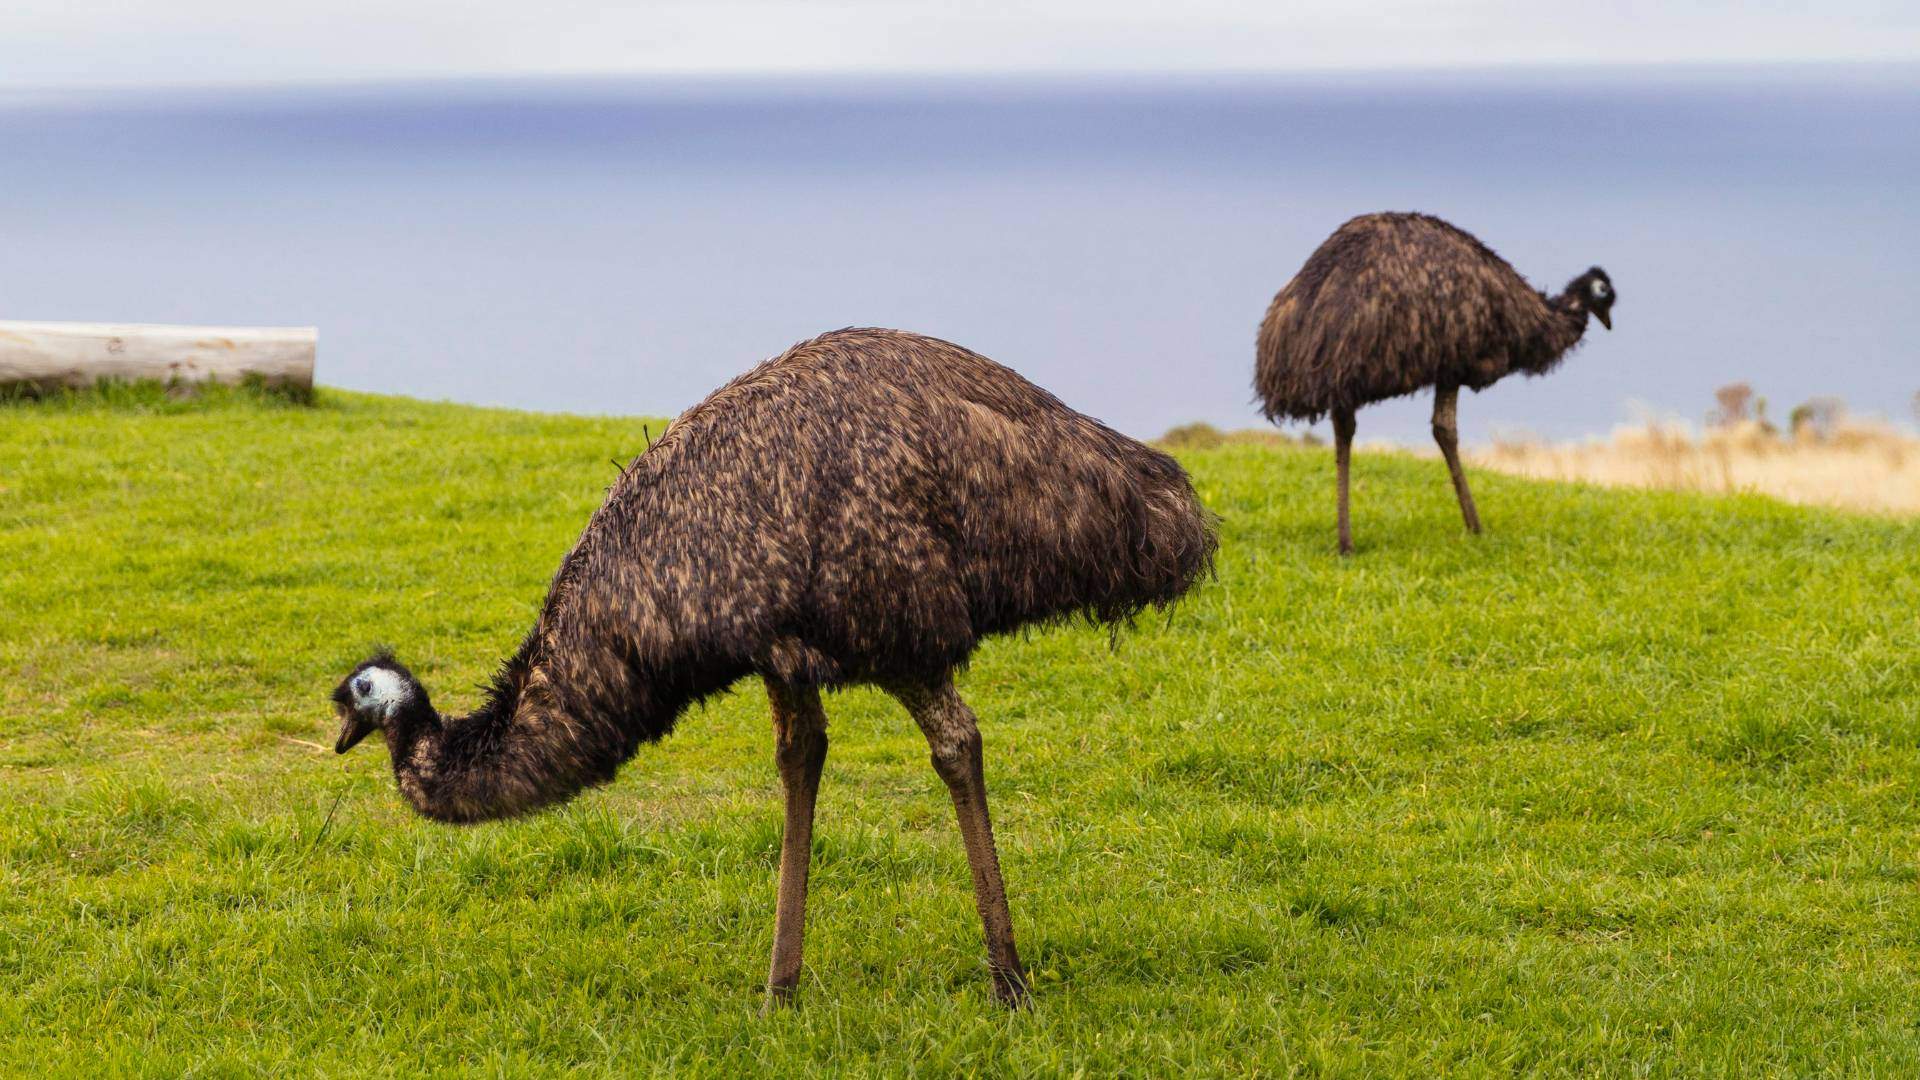 Two emus pecking at lush green grass, spotted at Wildlife Wonders with the Bass Strait in the background